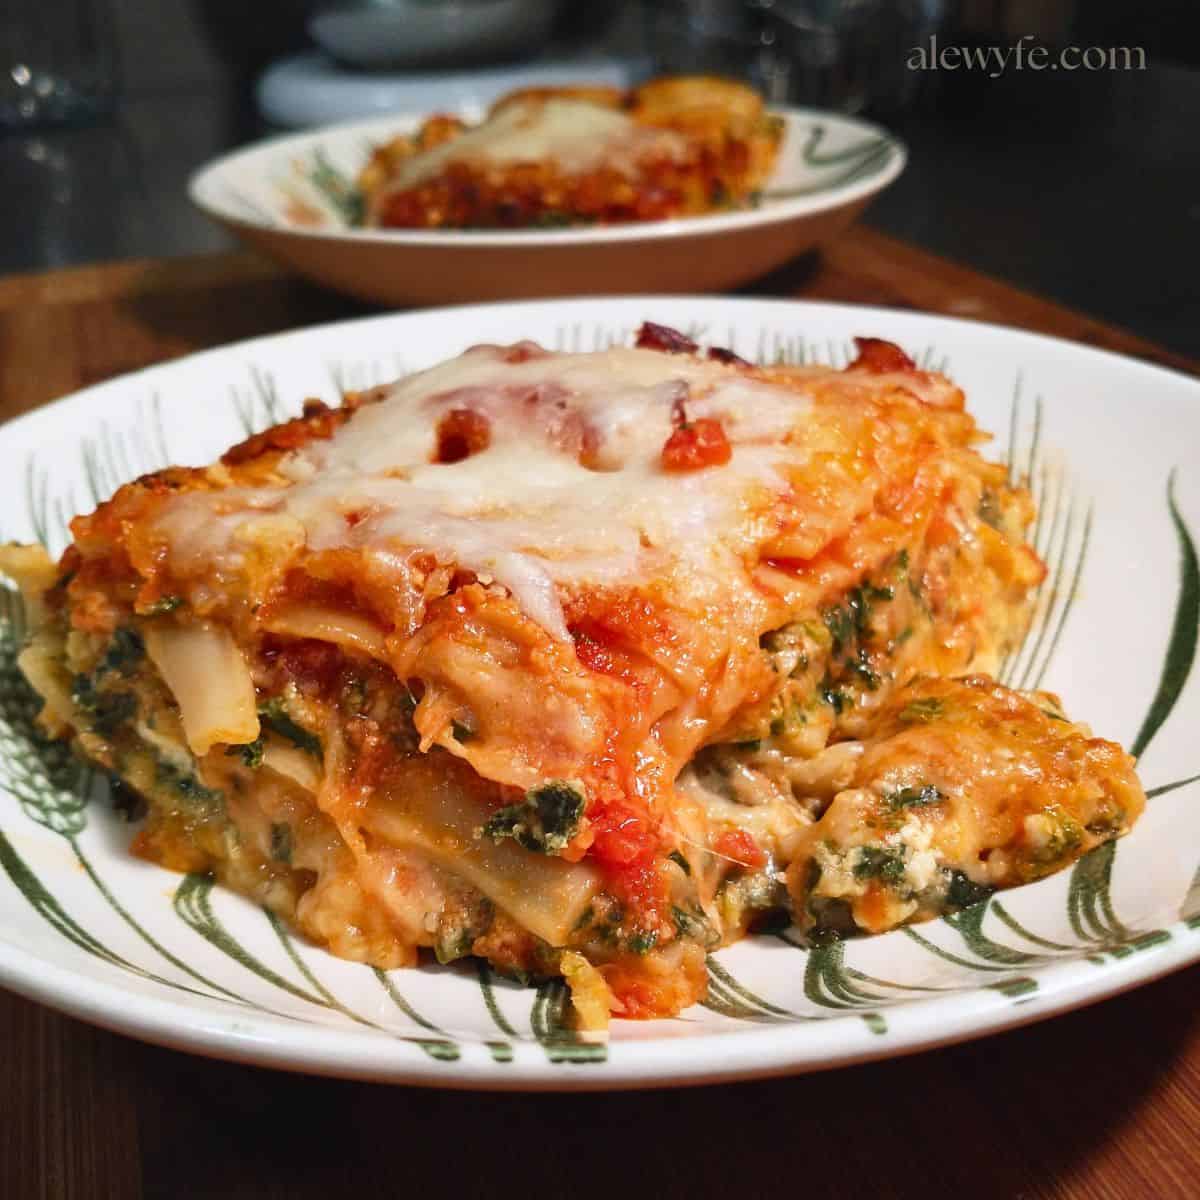 a plate with a large slice of homemade spinach and cheese lasagna.